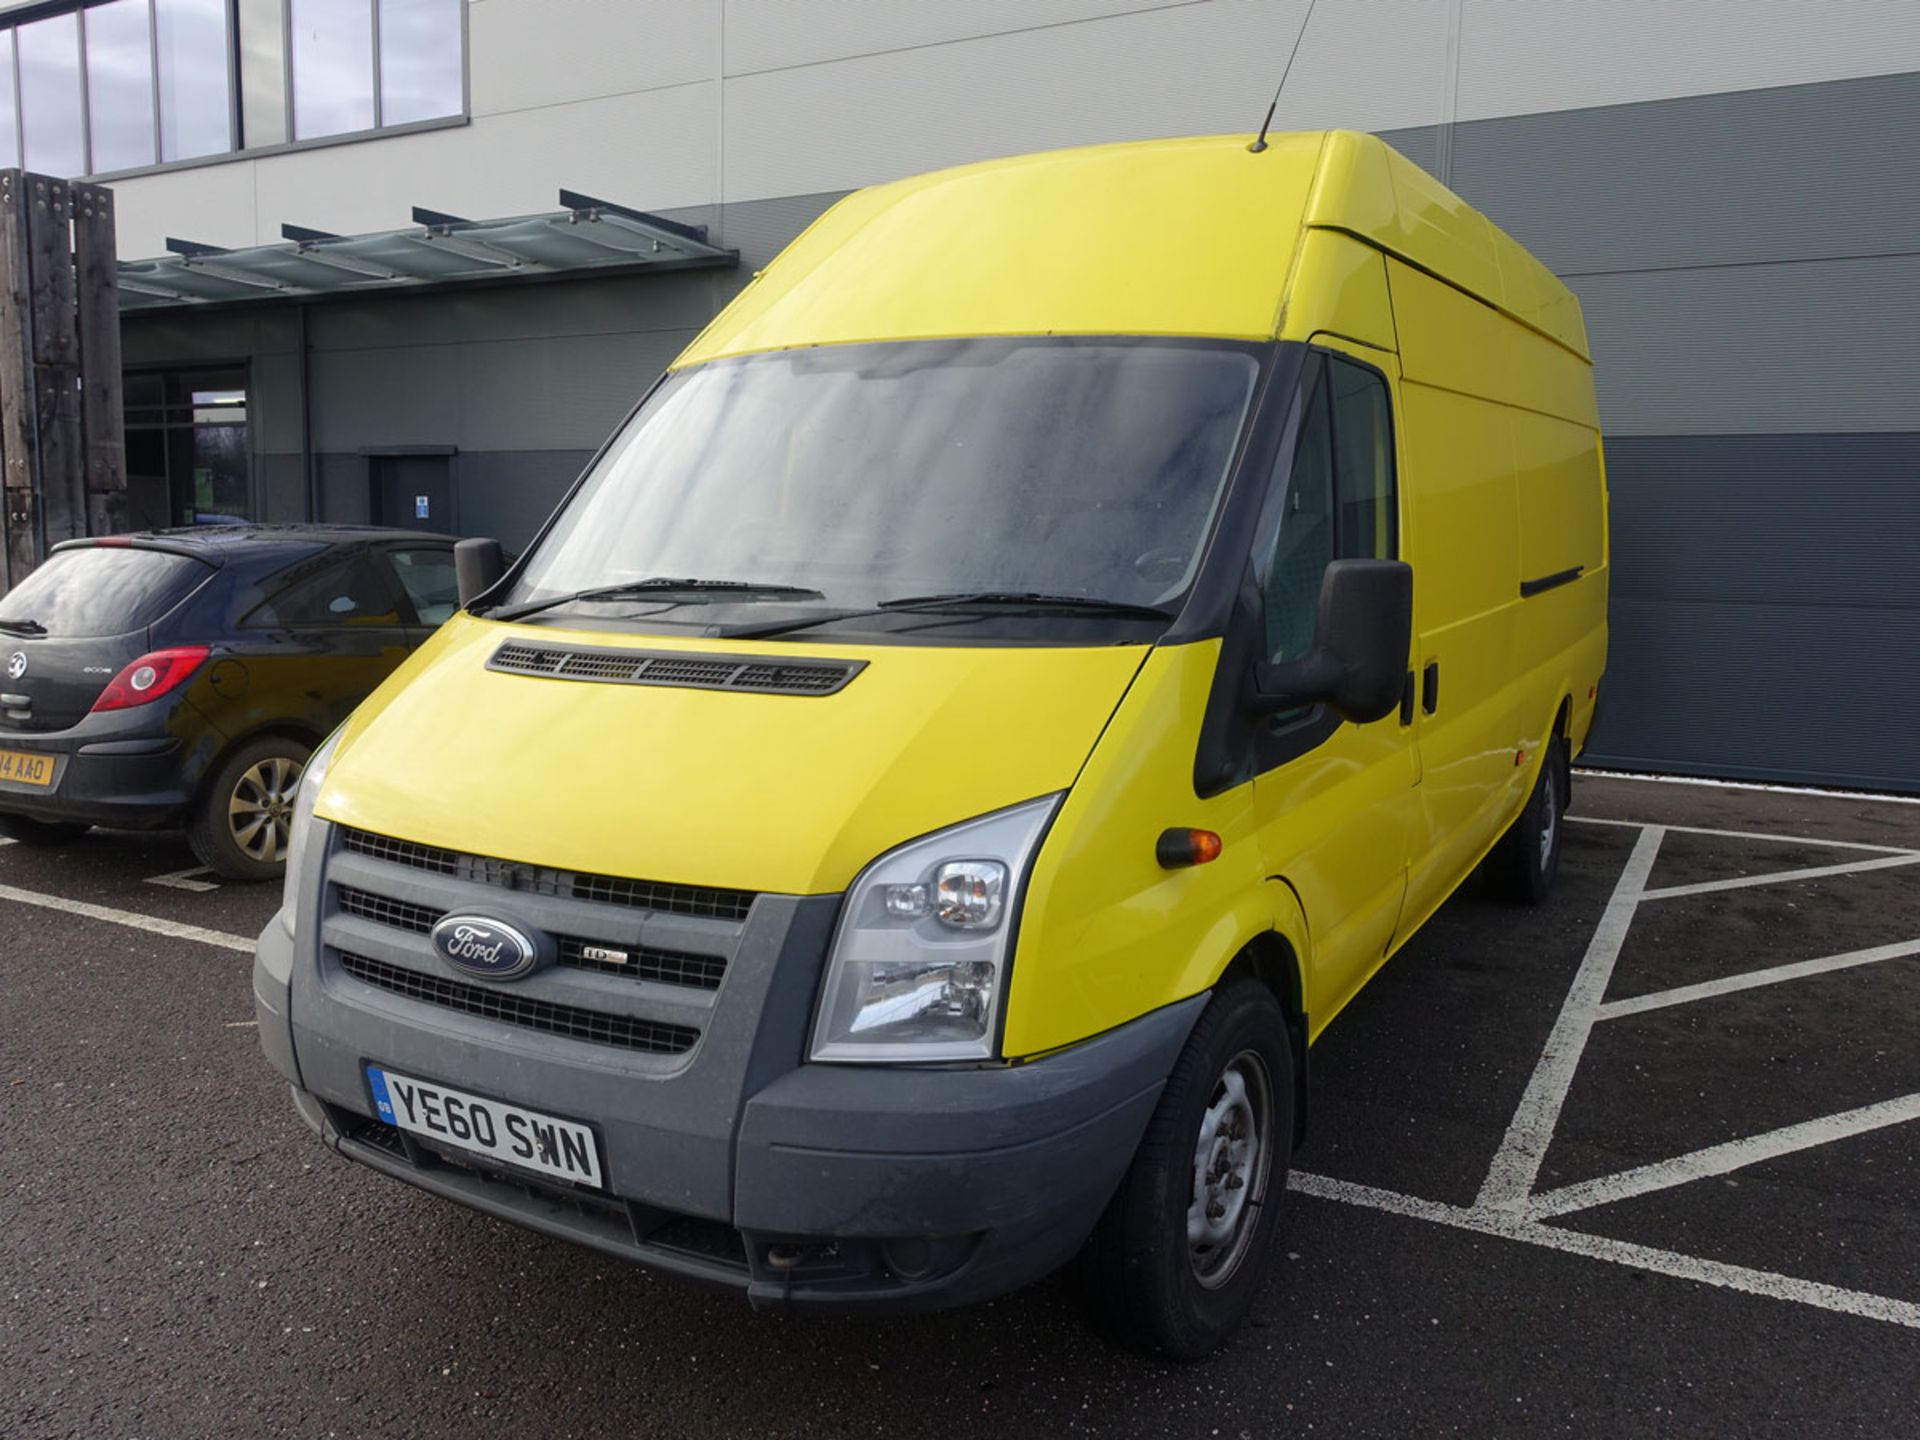 2010 Ford Transit Panel Van in yellow, 2402cc, key and V5 present, first registered 26,11,2010, 3 - Image 5 of 7